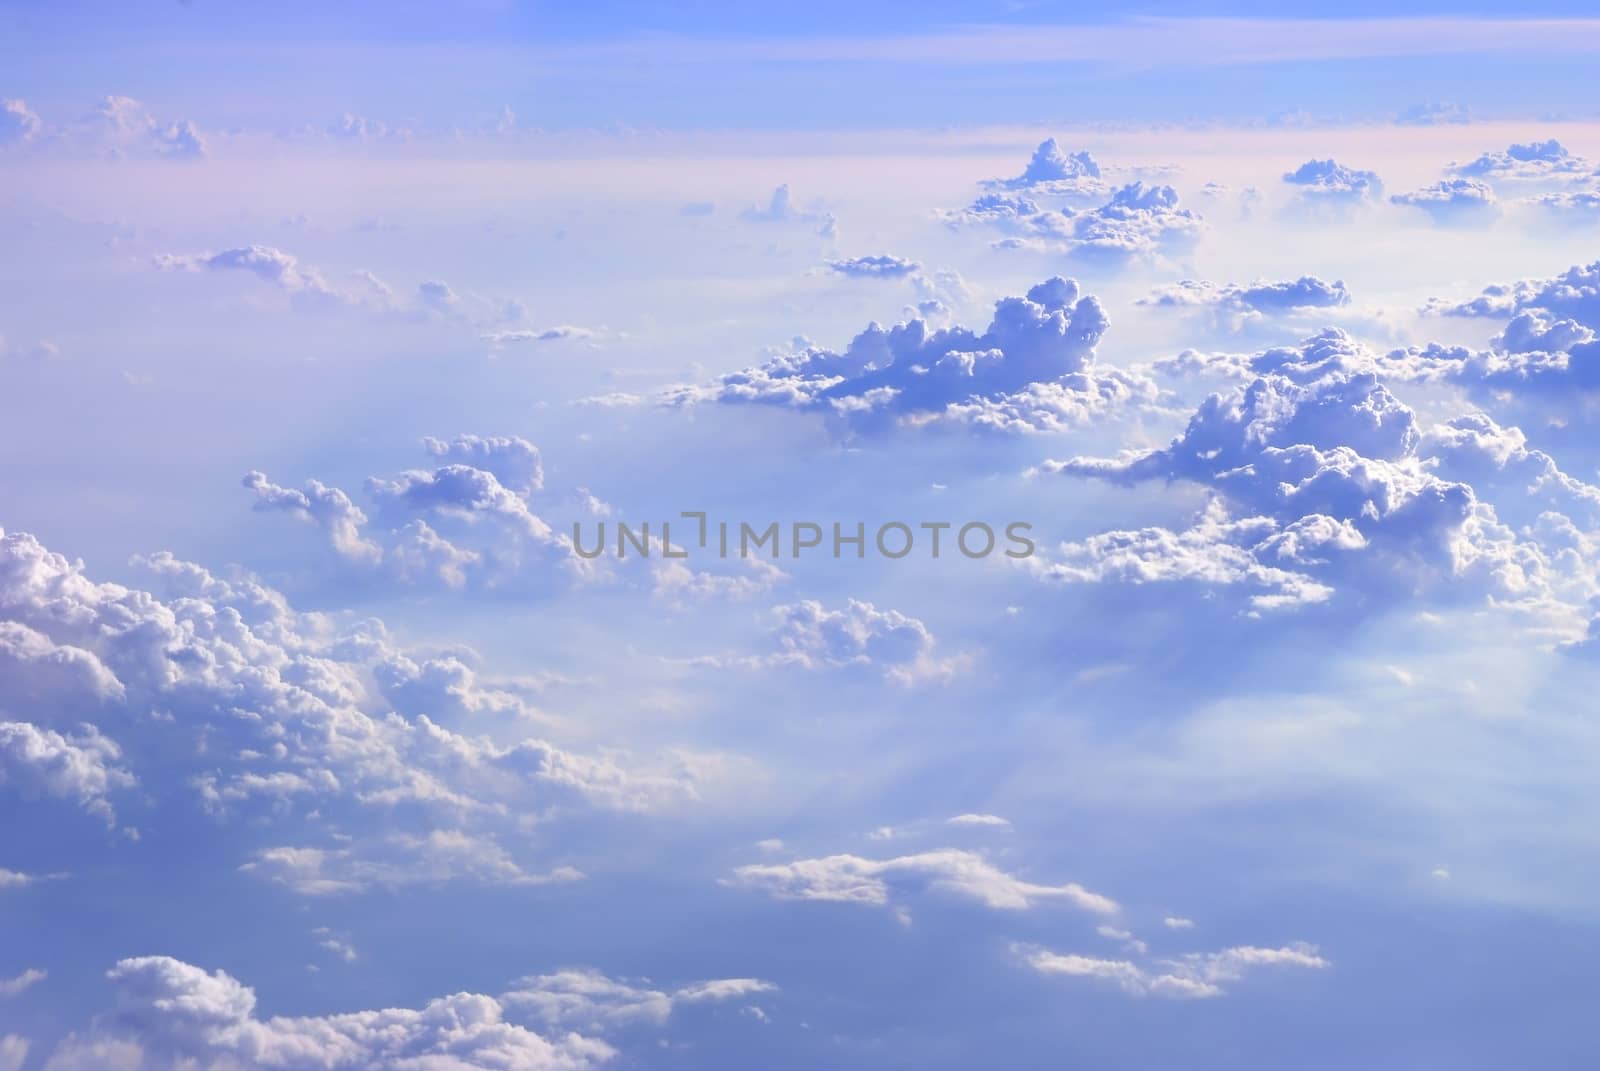 above the clouds by ideation90